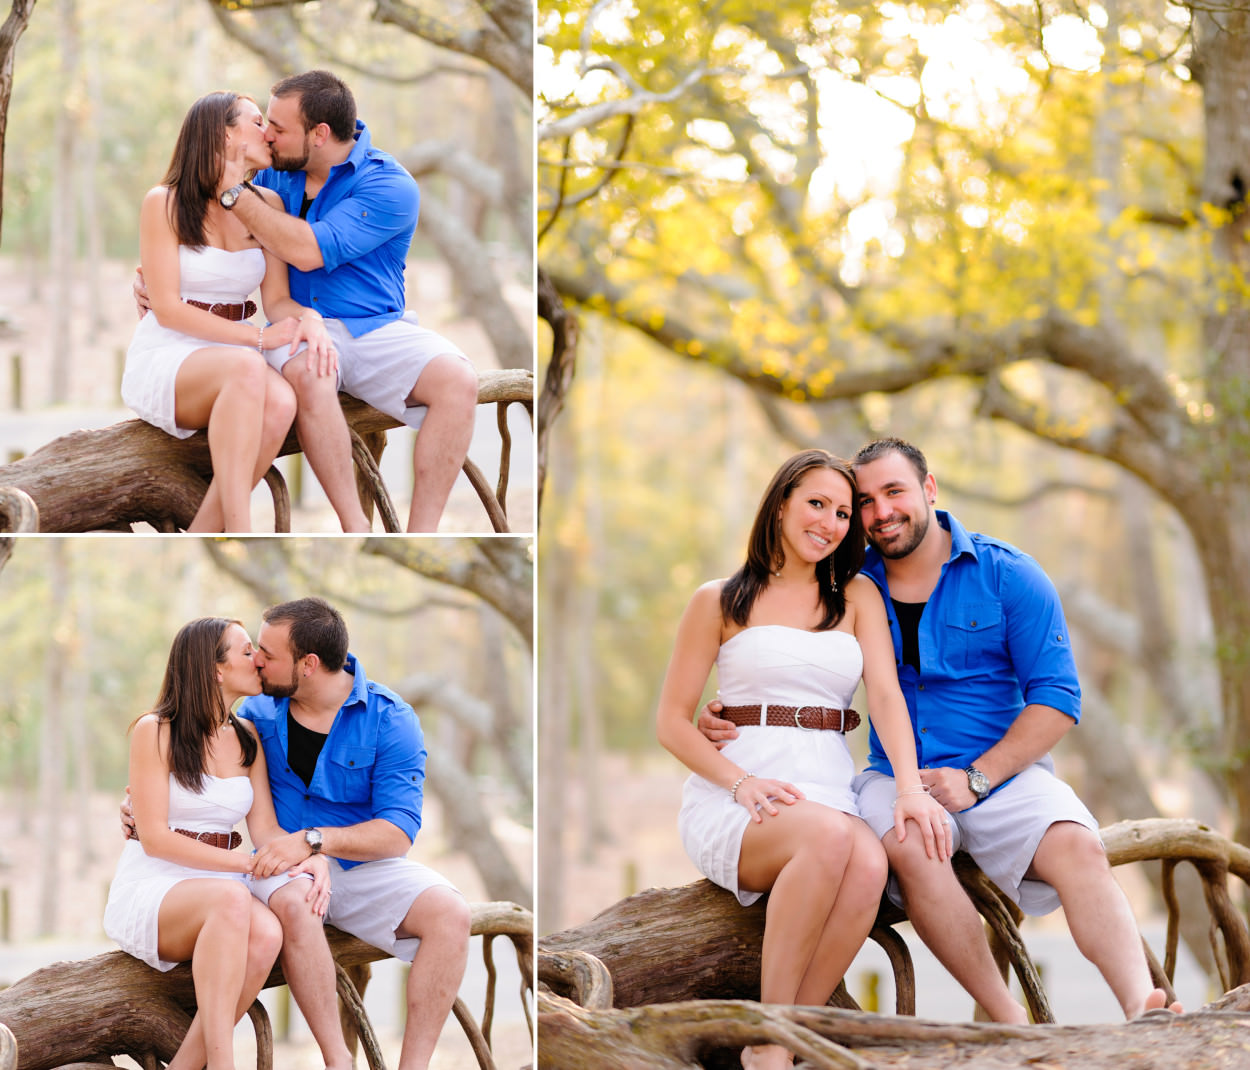 Couple sitting on the oak tree branch with sunlight coming through the trees